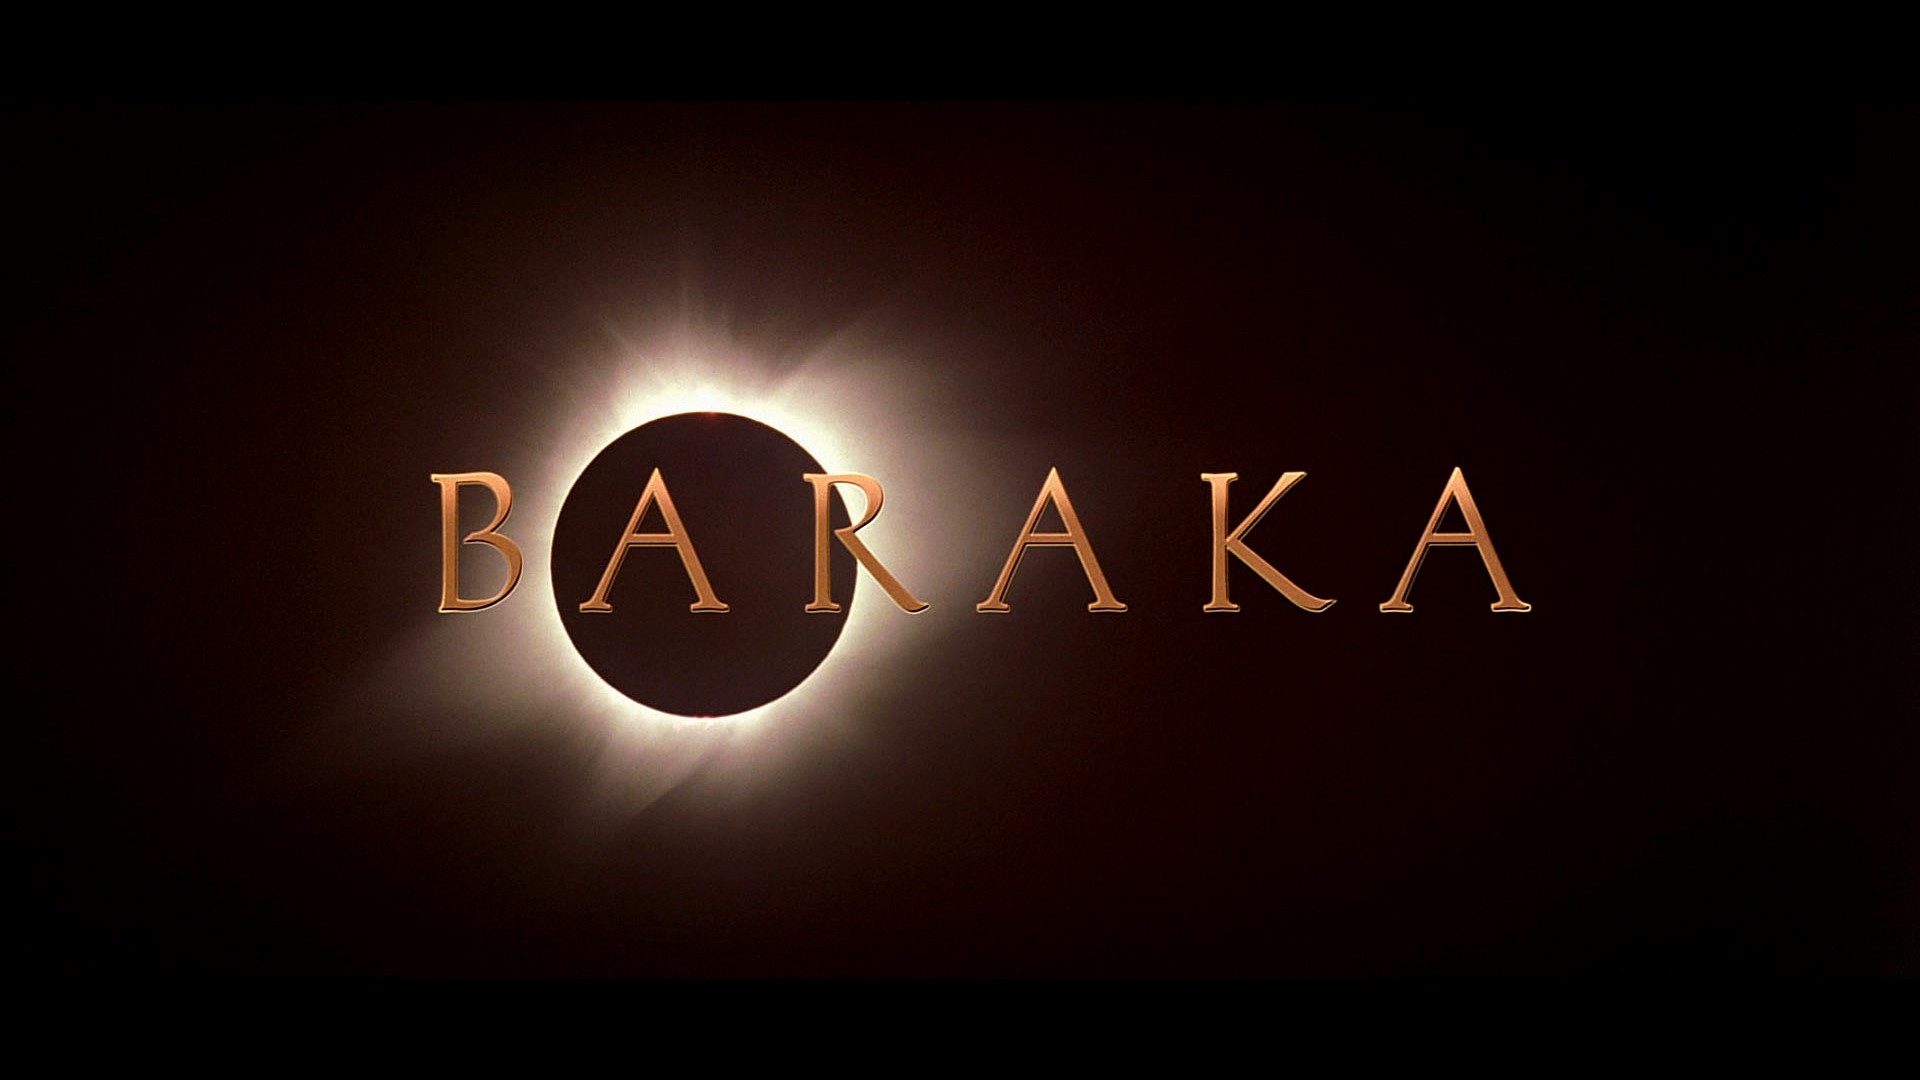 1920x1080 ... for the excellent visual documentary Baraka is such an incredible  image, I decided to use it “as is” for a wallpaper, with just a slight  contrast tweak.